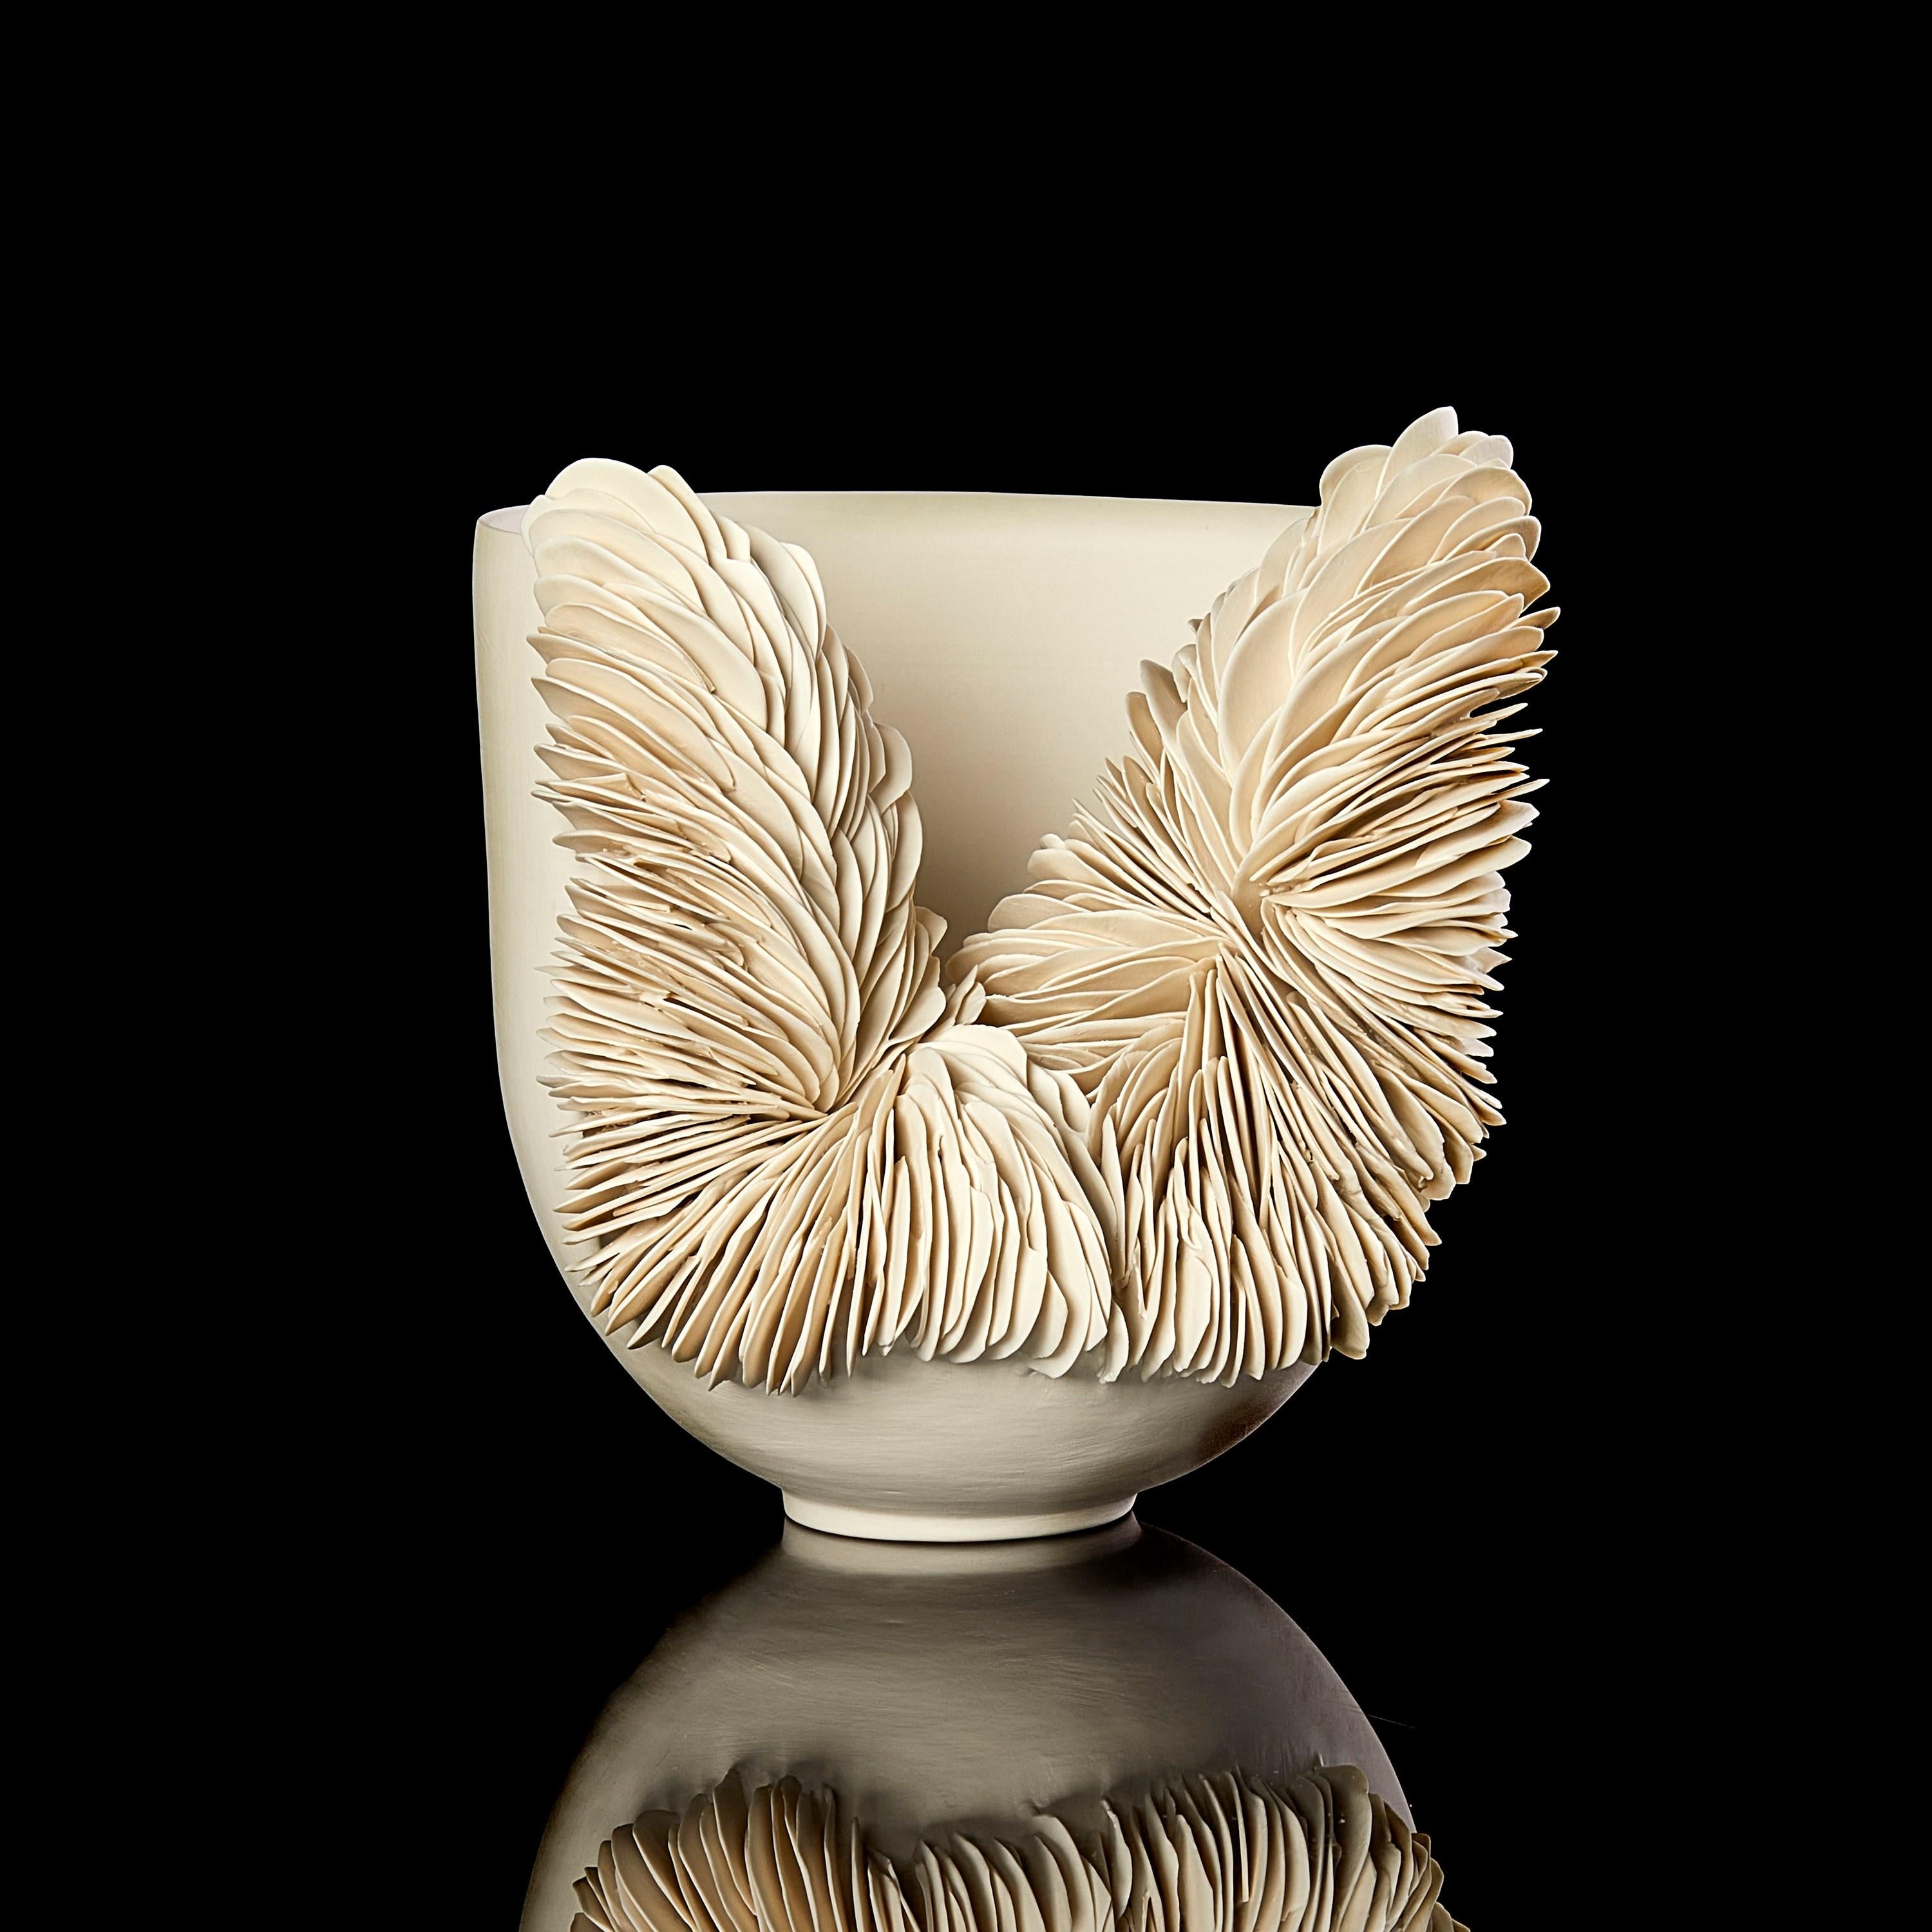 Hand-Crafted White Collapsed Bowl a porcelain sculptural vessel by Olivia Walker